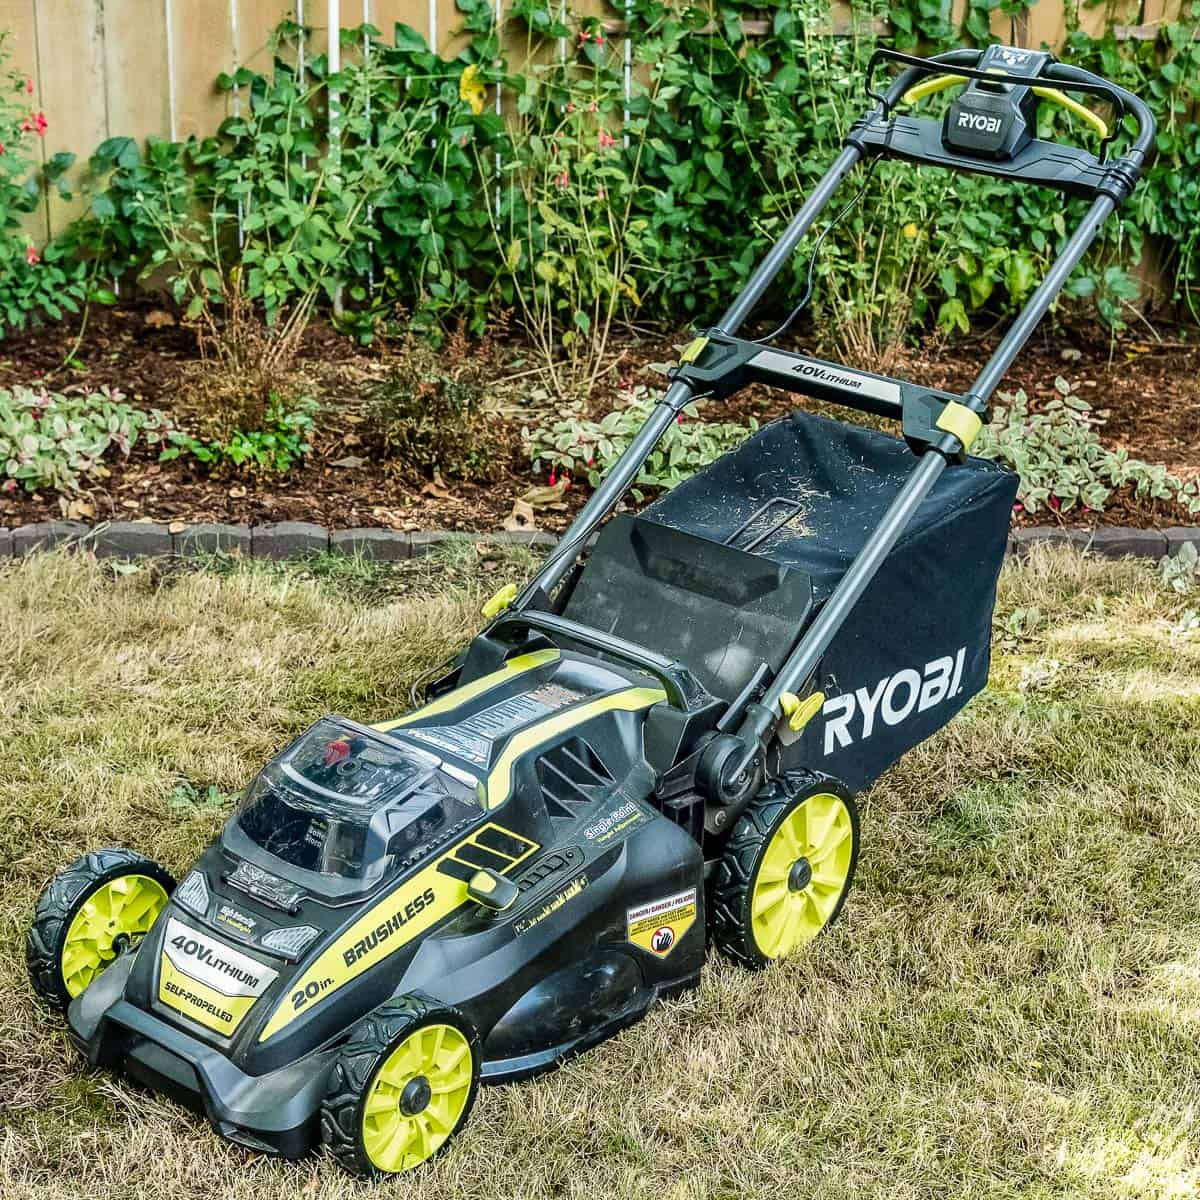 Ryobi self propelled electric lawn mower in front of garden bed